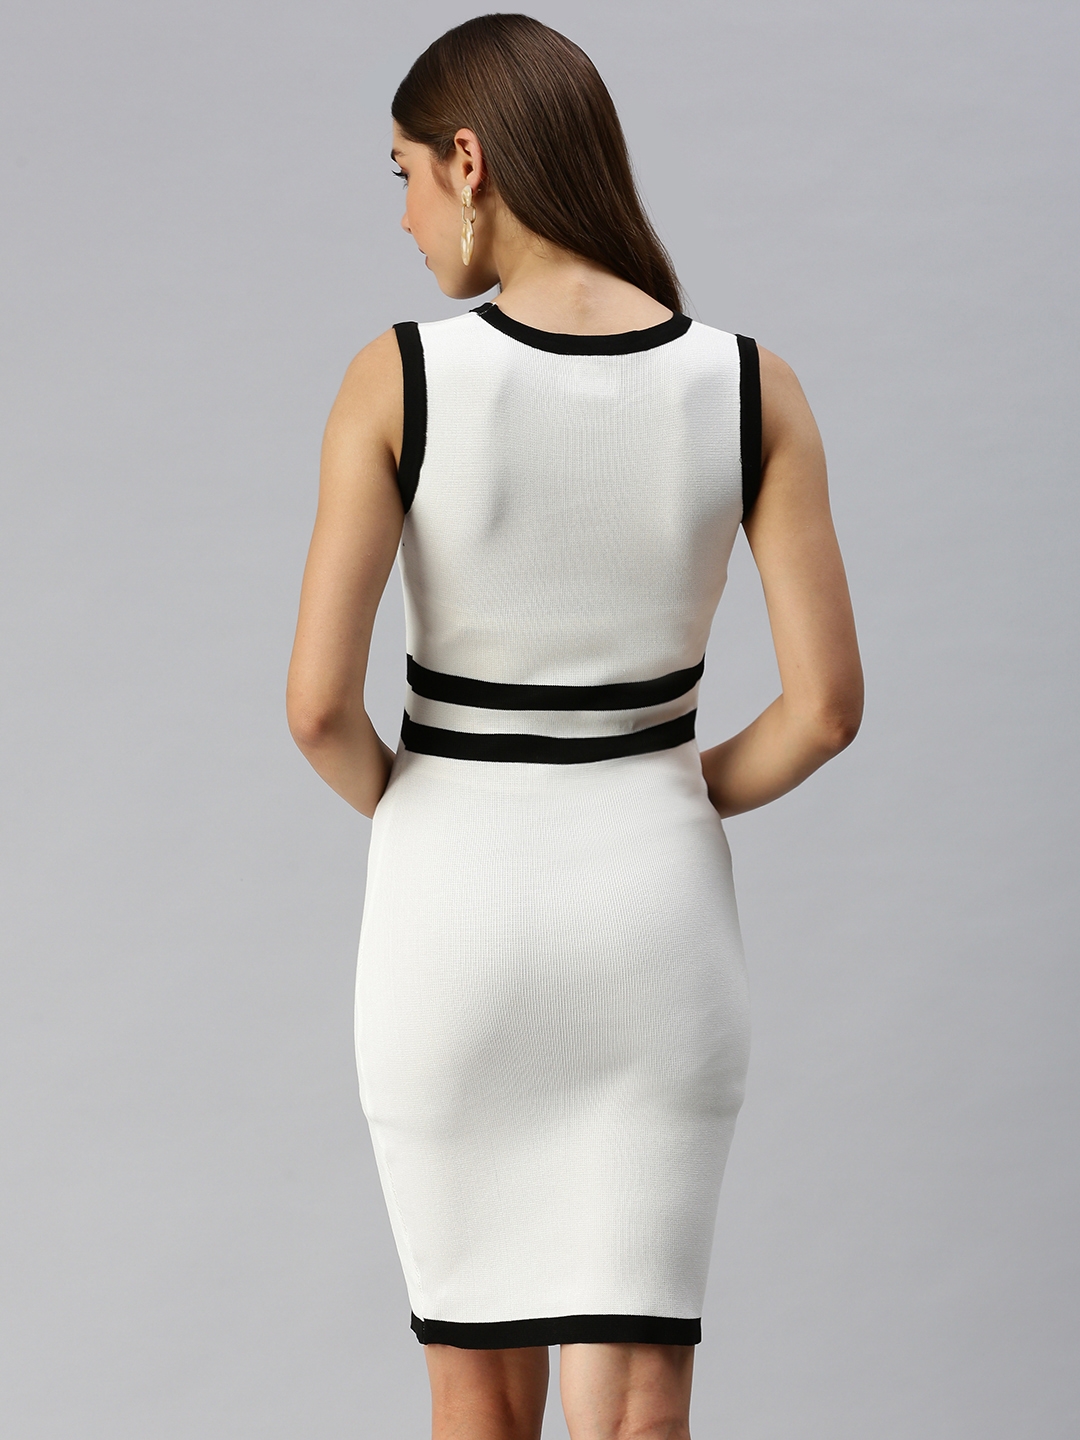 Women's White Synthetic Solid Dresses